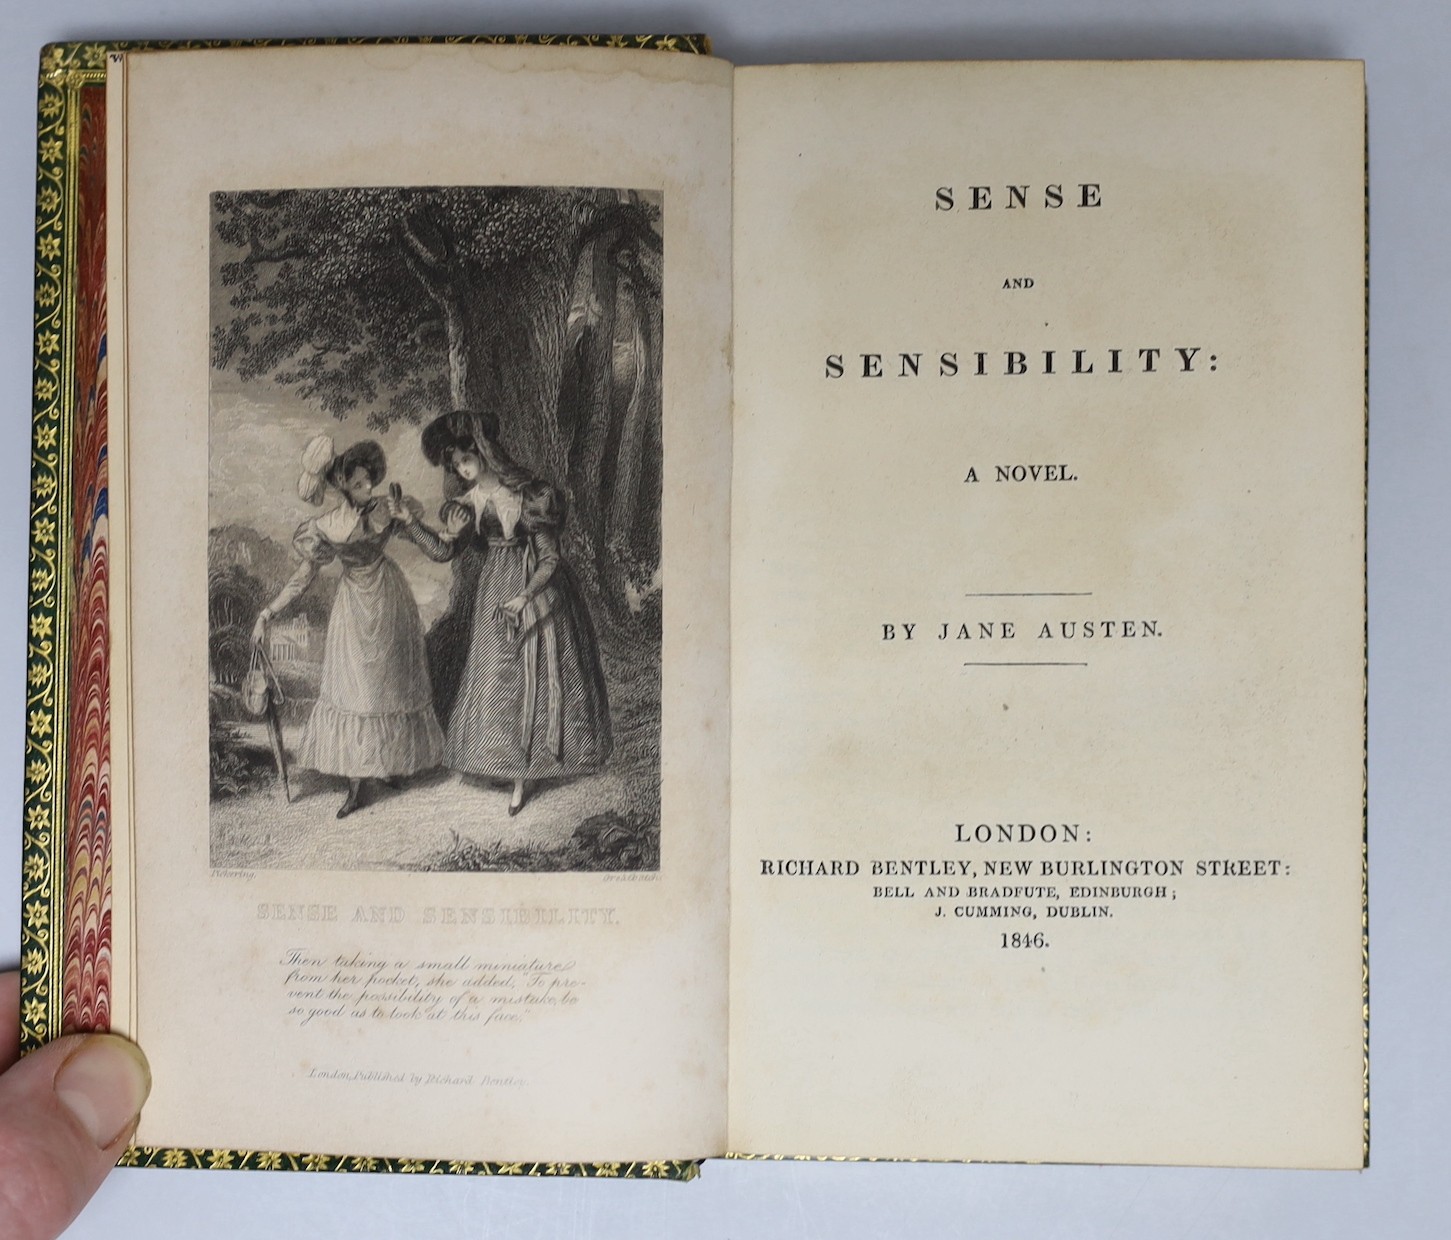 Austen, Jane - (Collected Novels) - 5 vols, engraved frontispieces; mid 19th cent. polished green calf, decorative gilt rules on covers, gilt-riled and decorated panelled spines - lettered direct, ge. and gilt-decorated